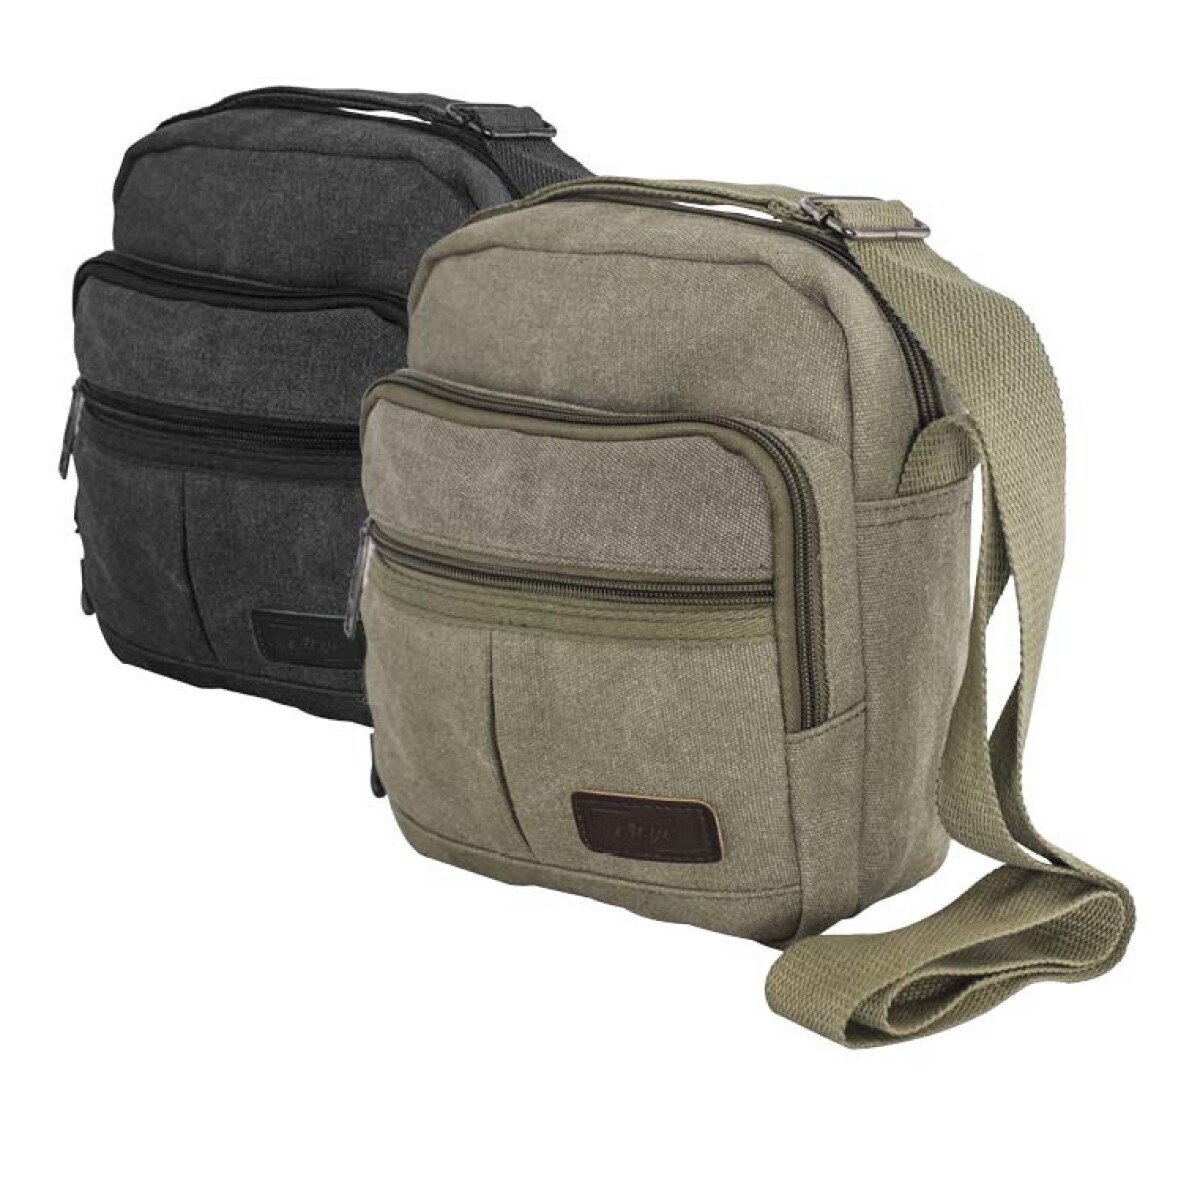 Morral Portter Canvas Arequita .- 